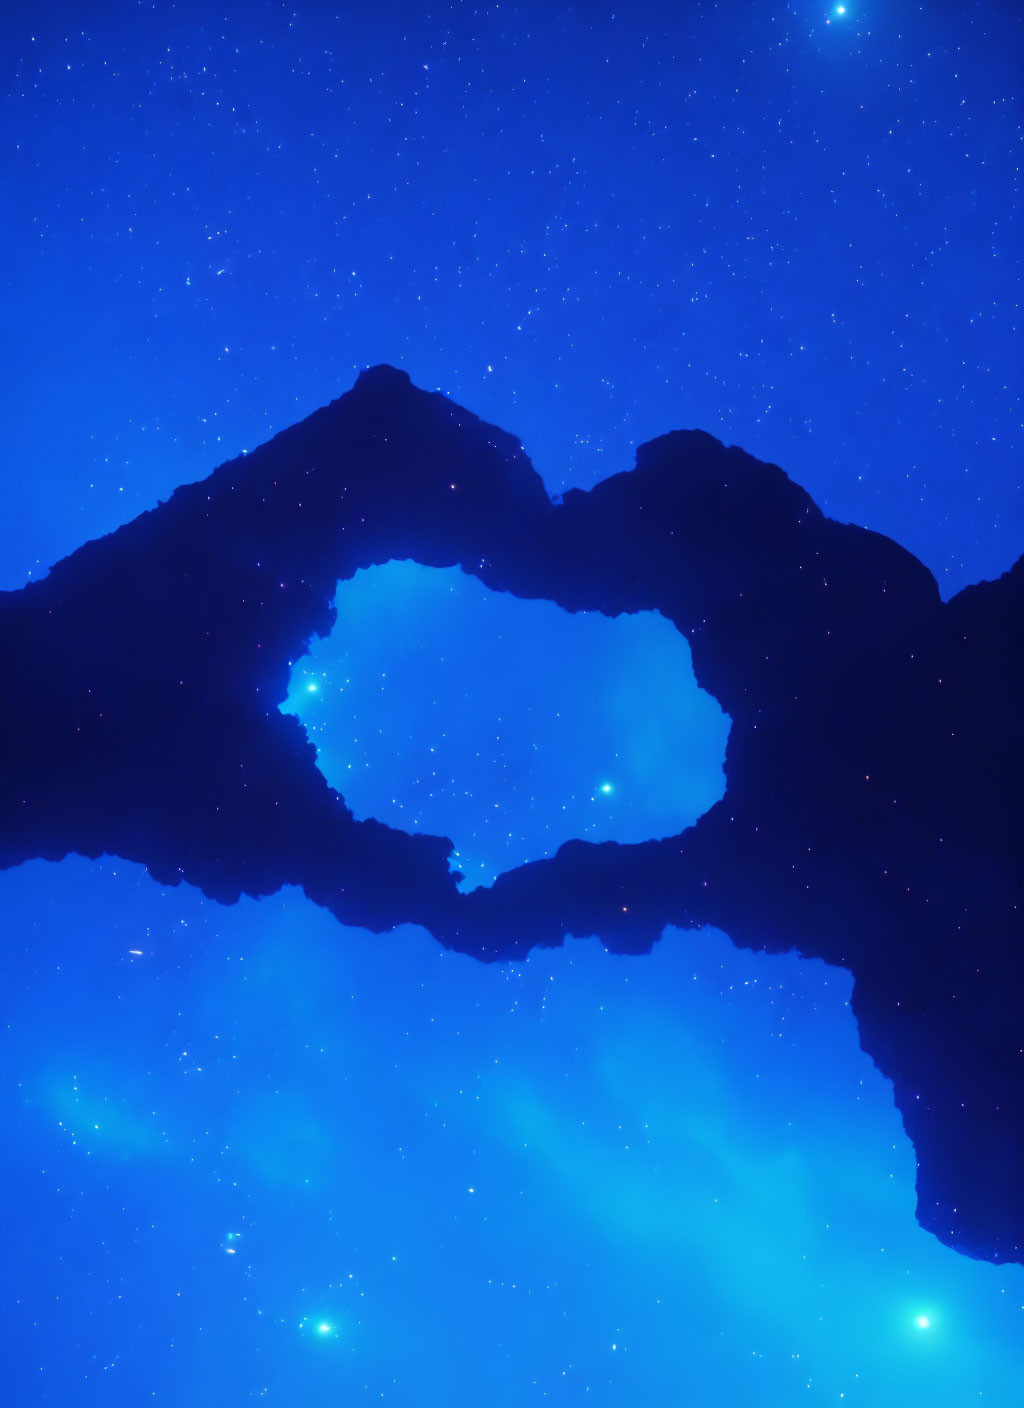 Silhouette with Heart-shaped Opening on Starry Night Sky